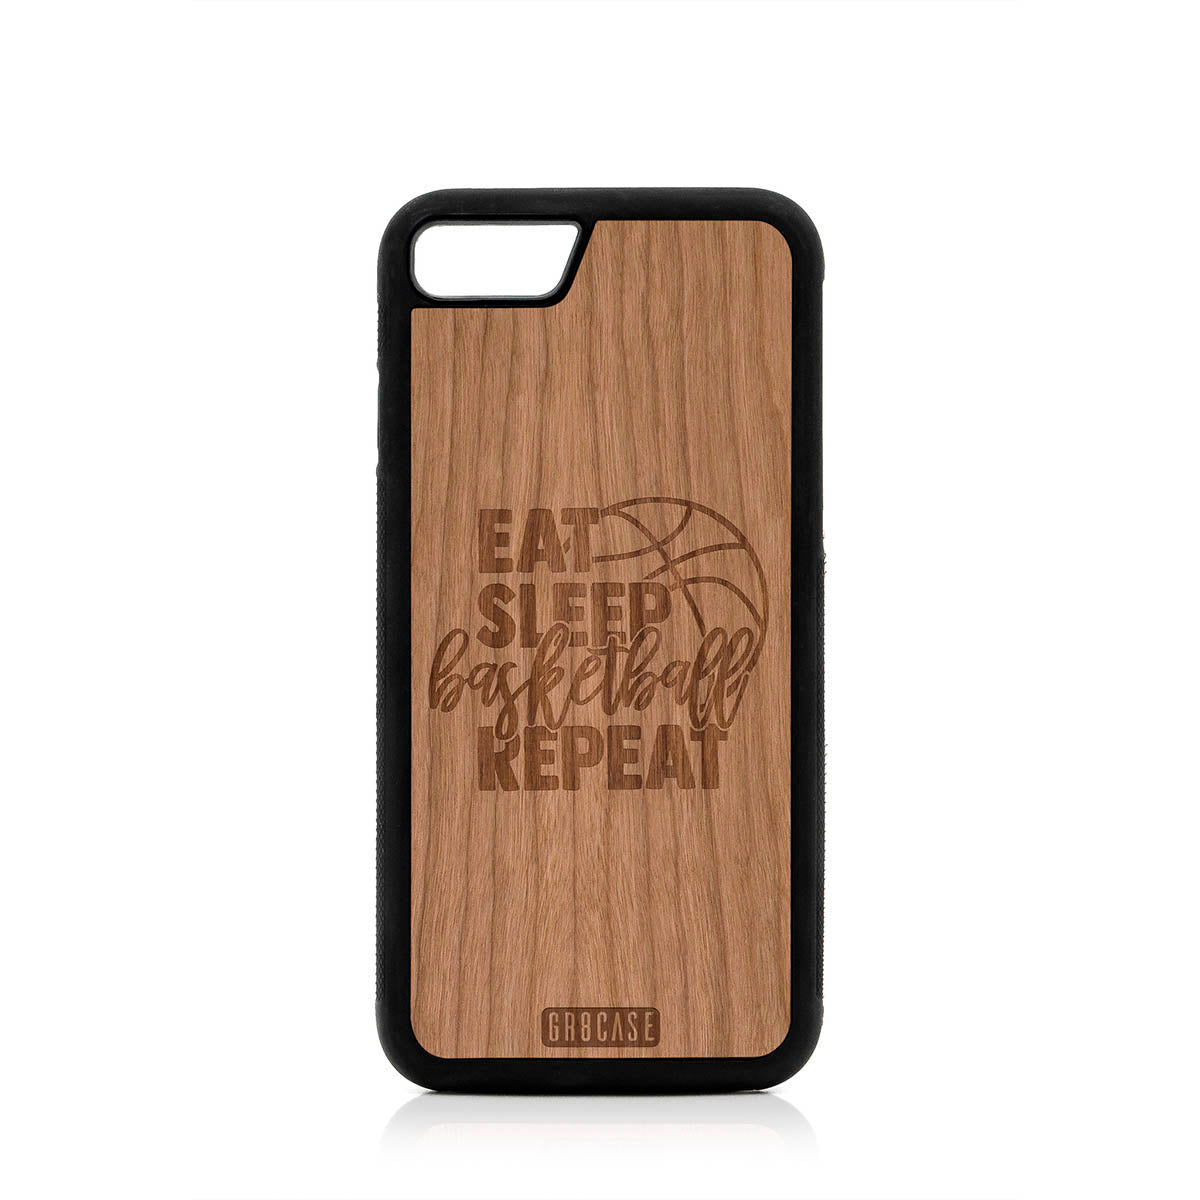 Eat Sleep Basketball Repeat Design Wood Case For iPhone SE 2020